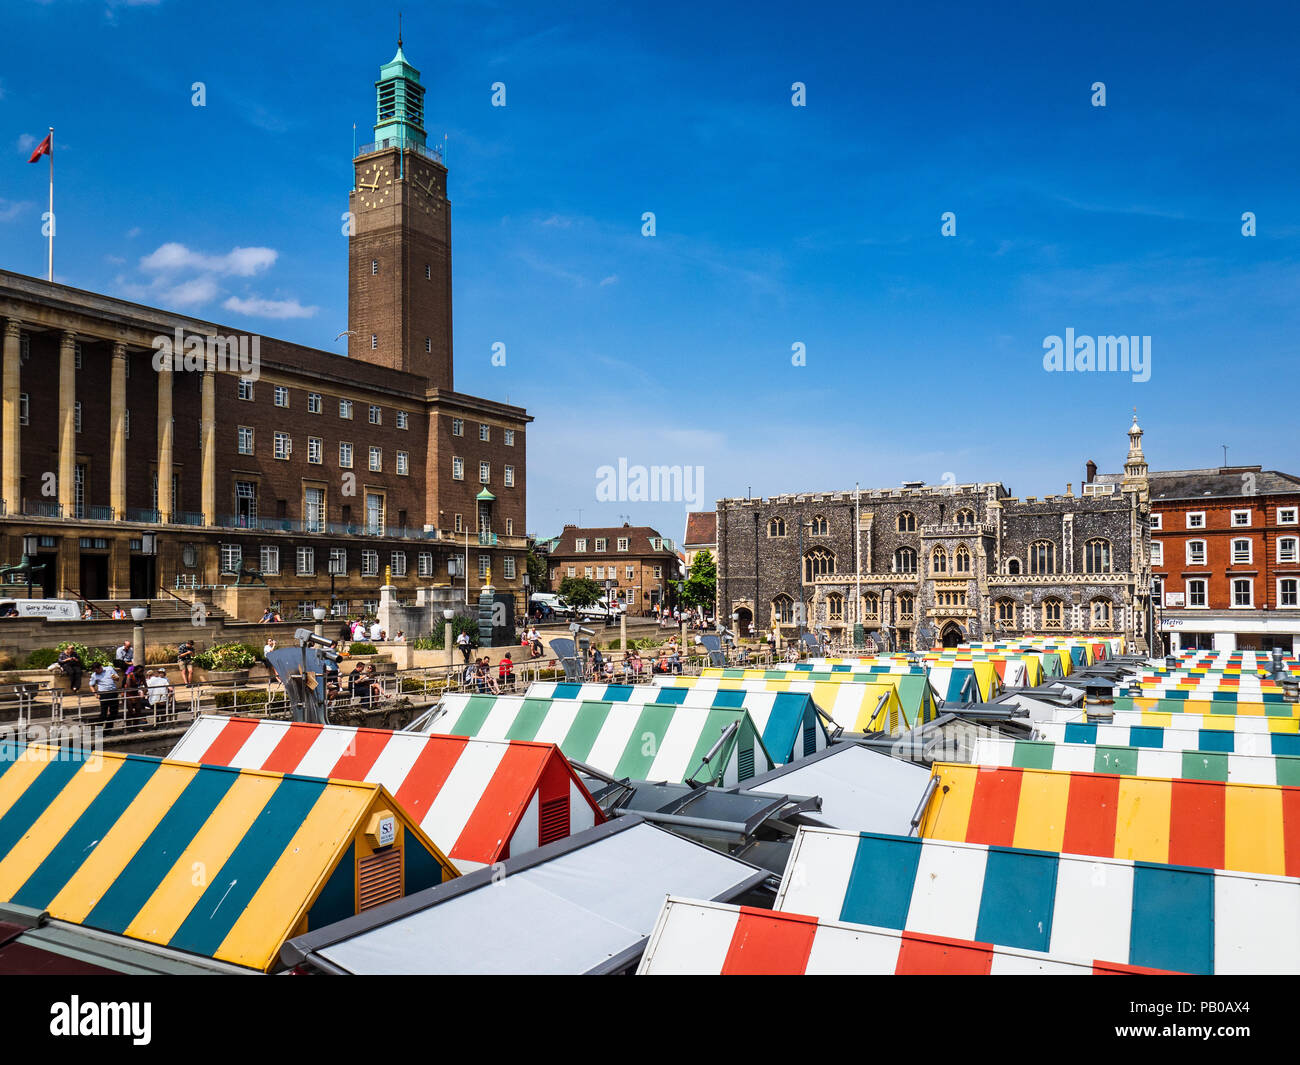 Norwich City Centre - Norwich Tourism - Norwich Market with Norwich City Hall and Guildhall in the background. Norwich City Centre. Stock Photo